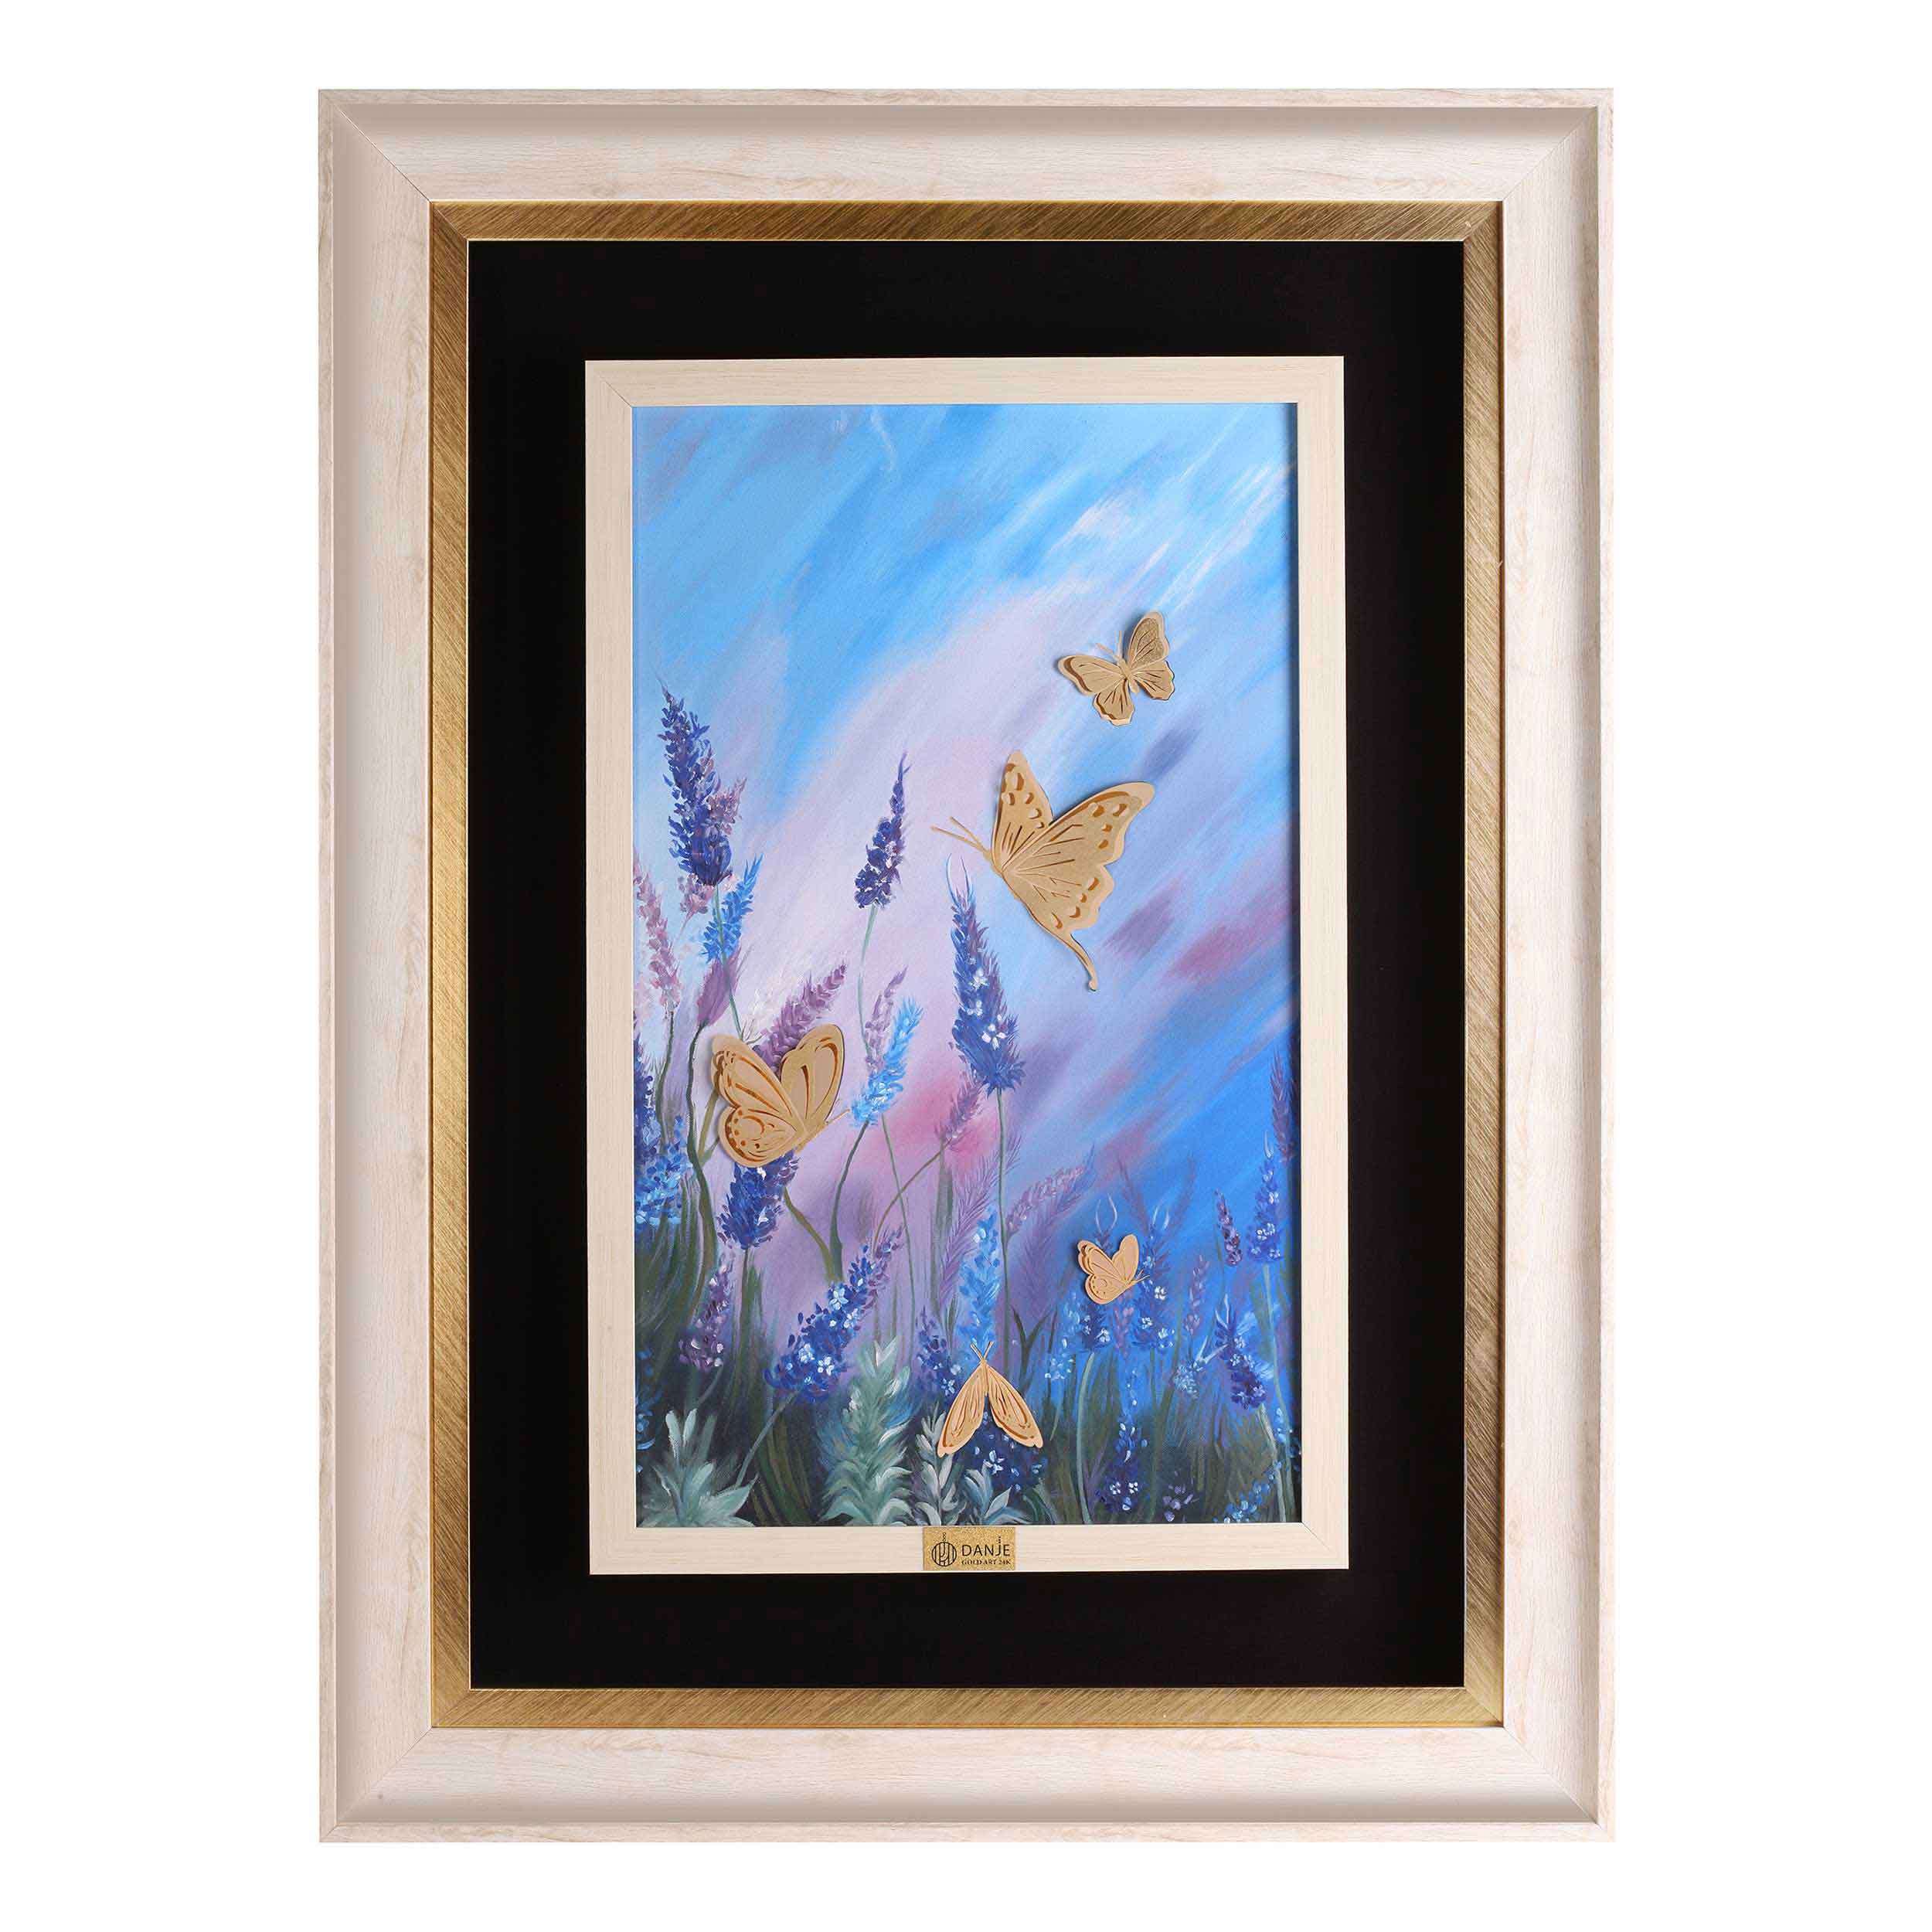 24 carat gold leaf painting with PVC frame, Danjeh brand butterfly design